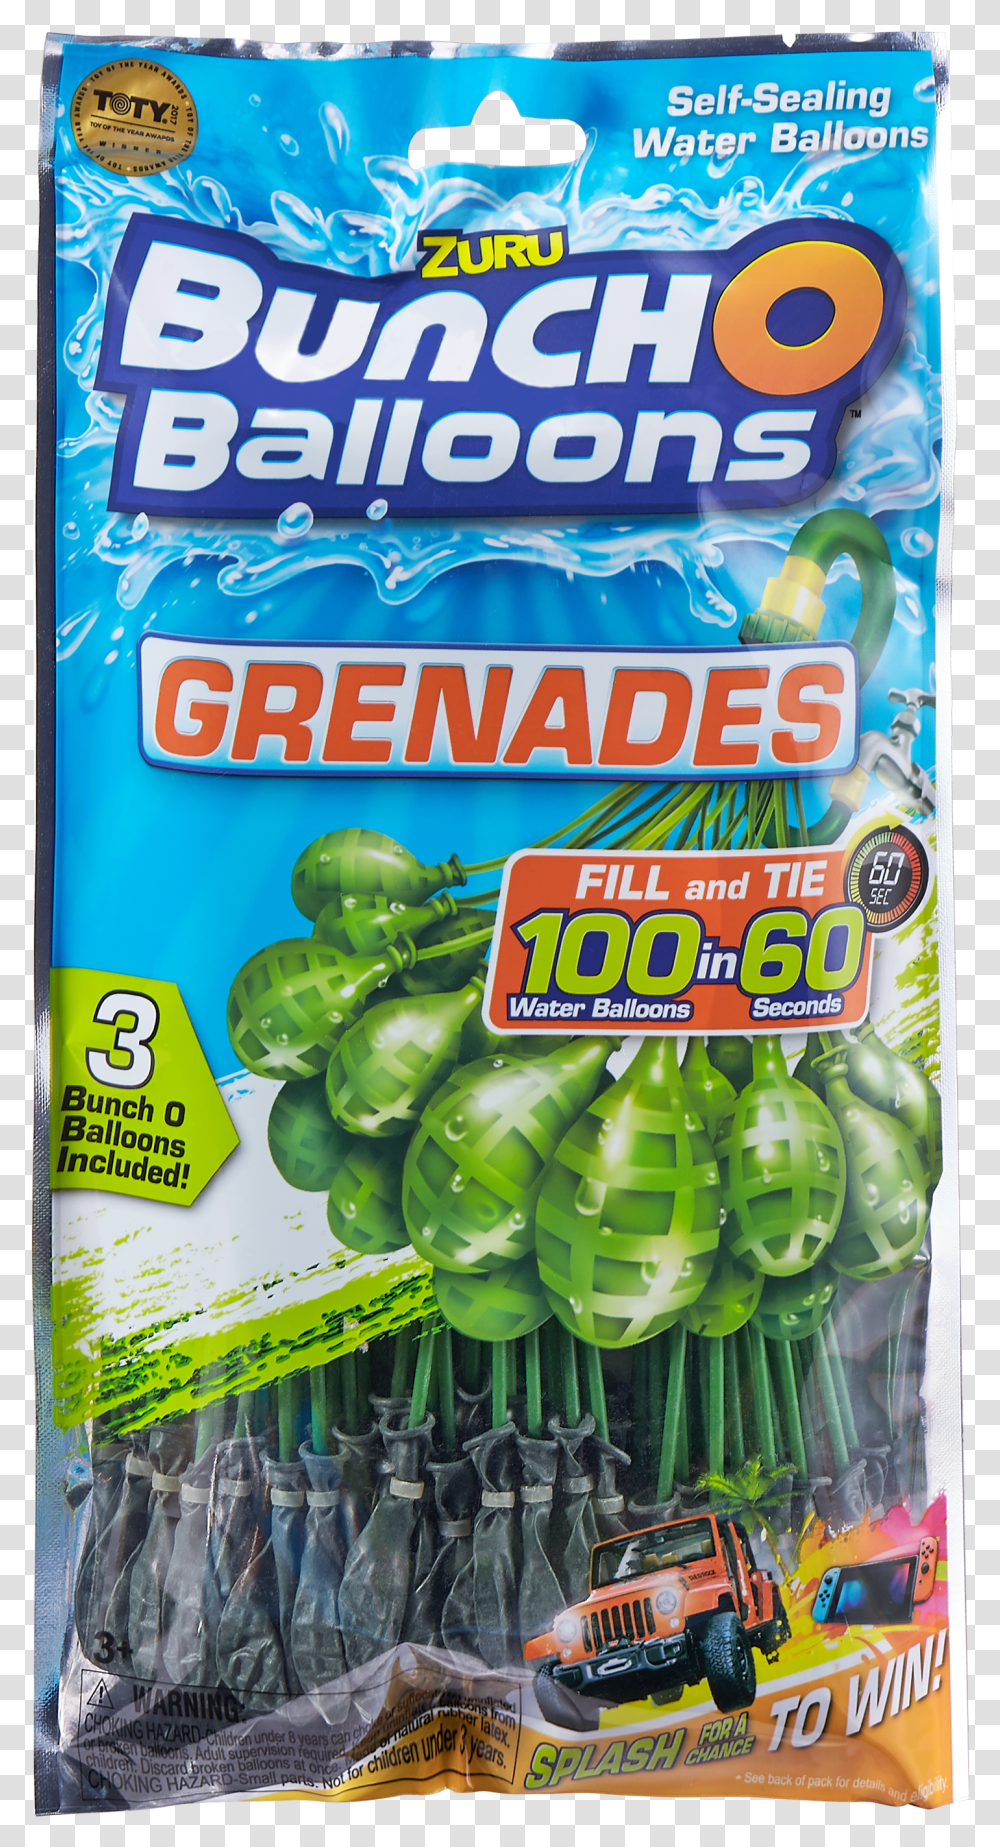 Bunch O Balloons Splash To Win Transparent Png